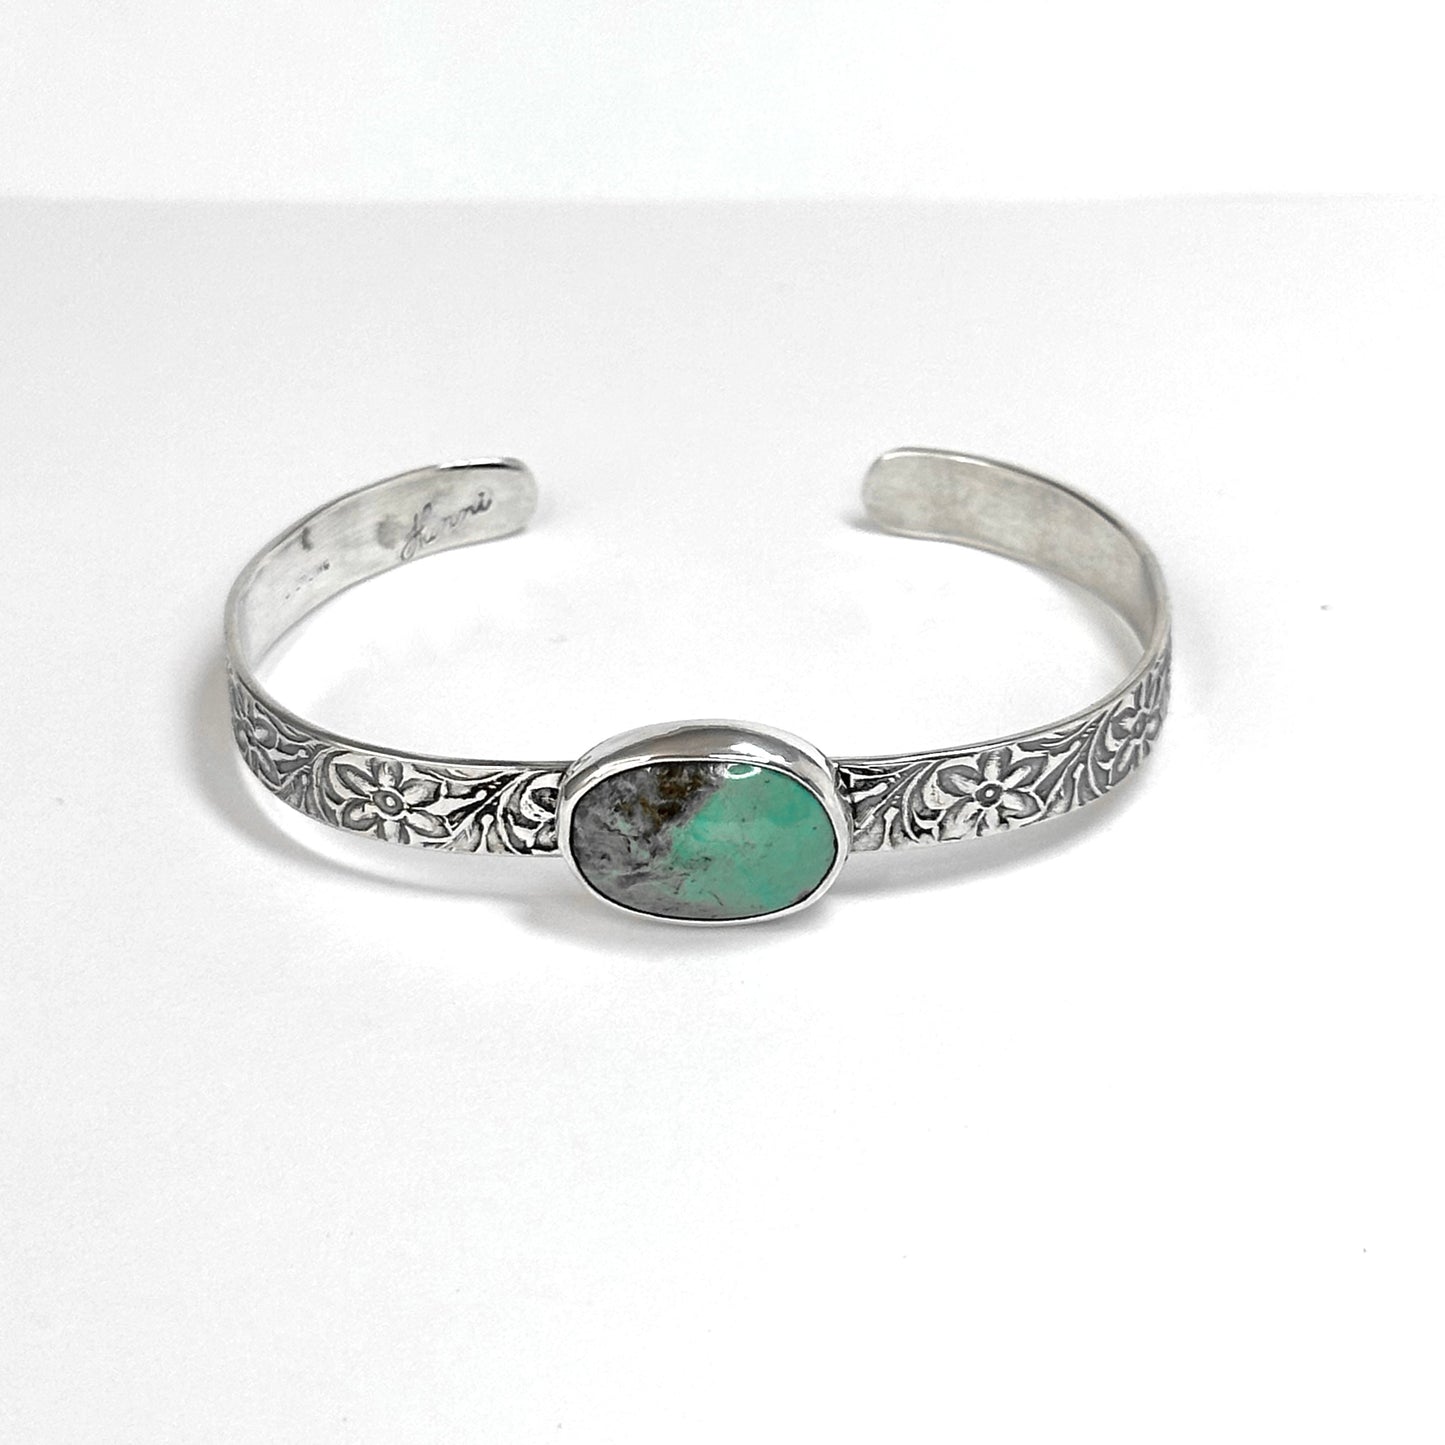 Patterned Cuff Bracelets with Turquoise, Rosarita, Variscite, and Azurite in Sterling Silver